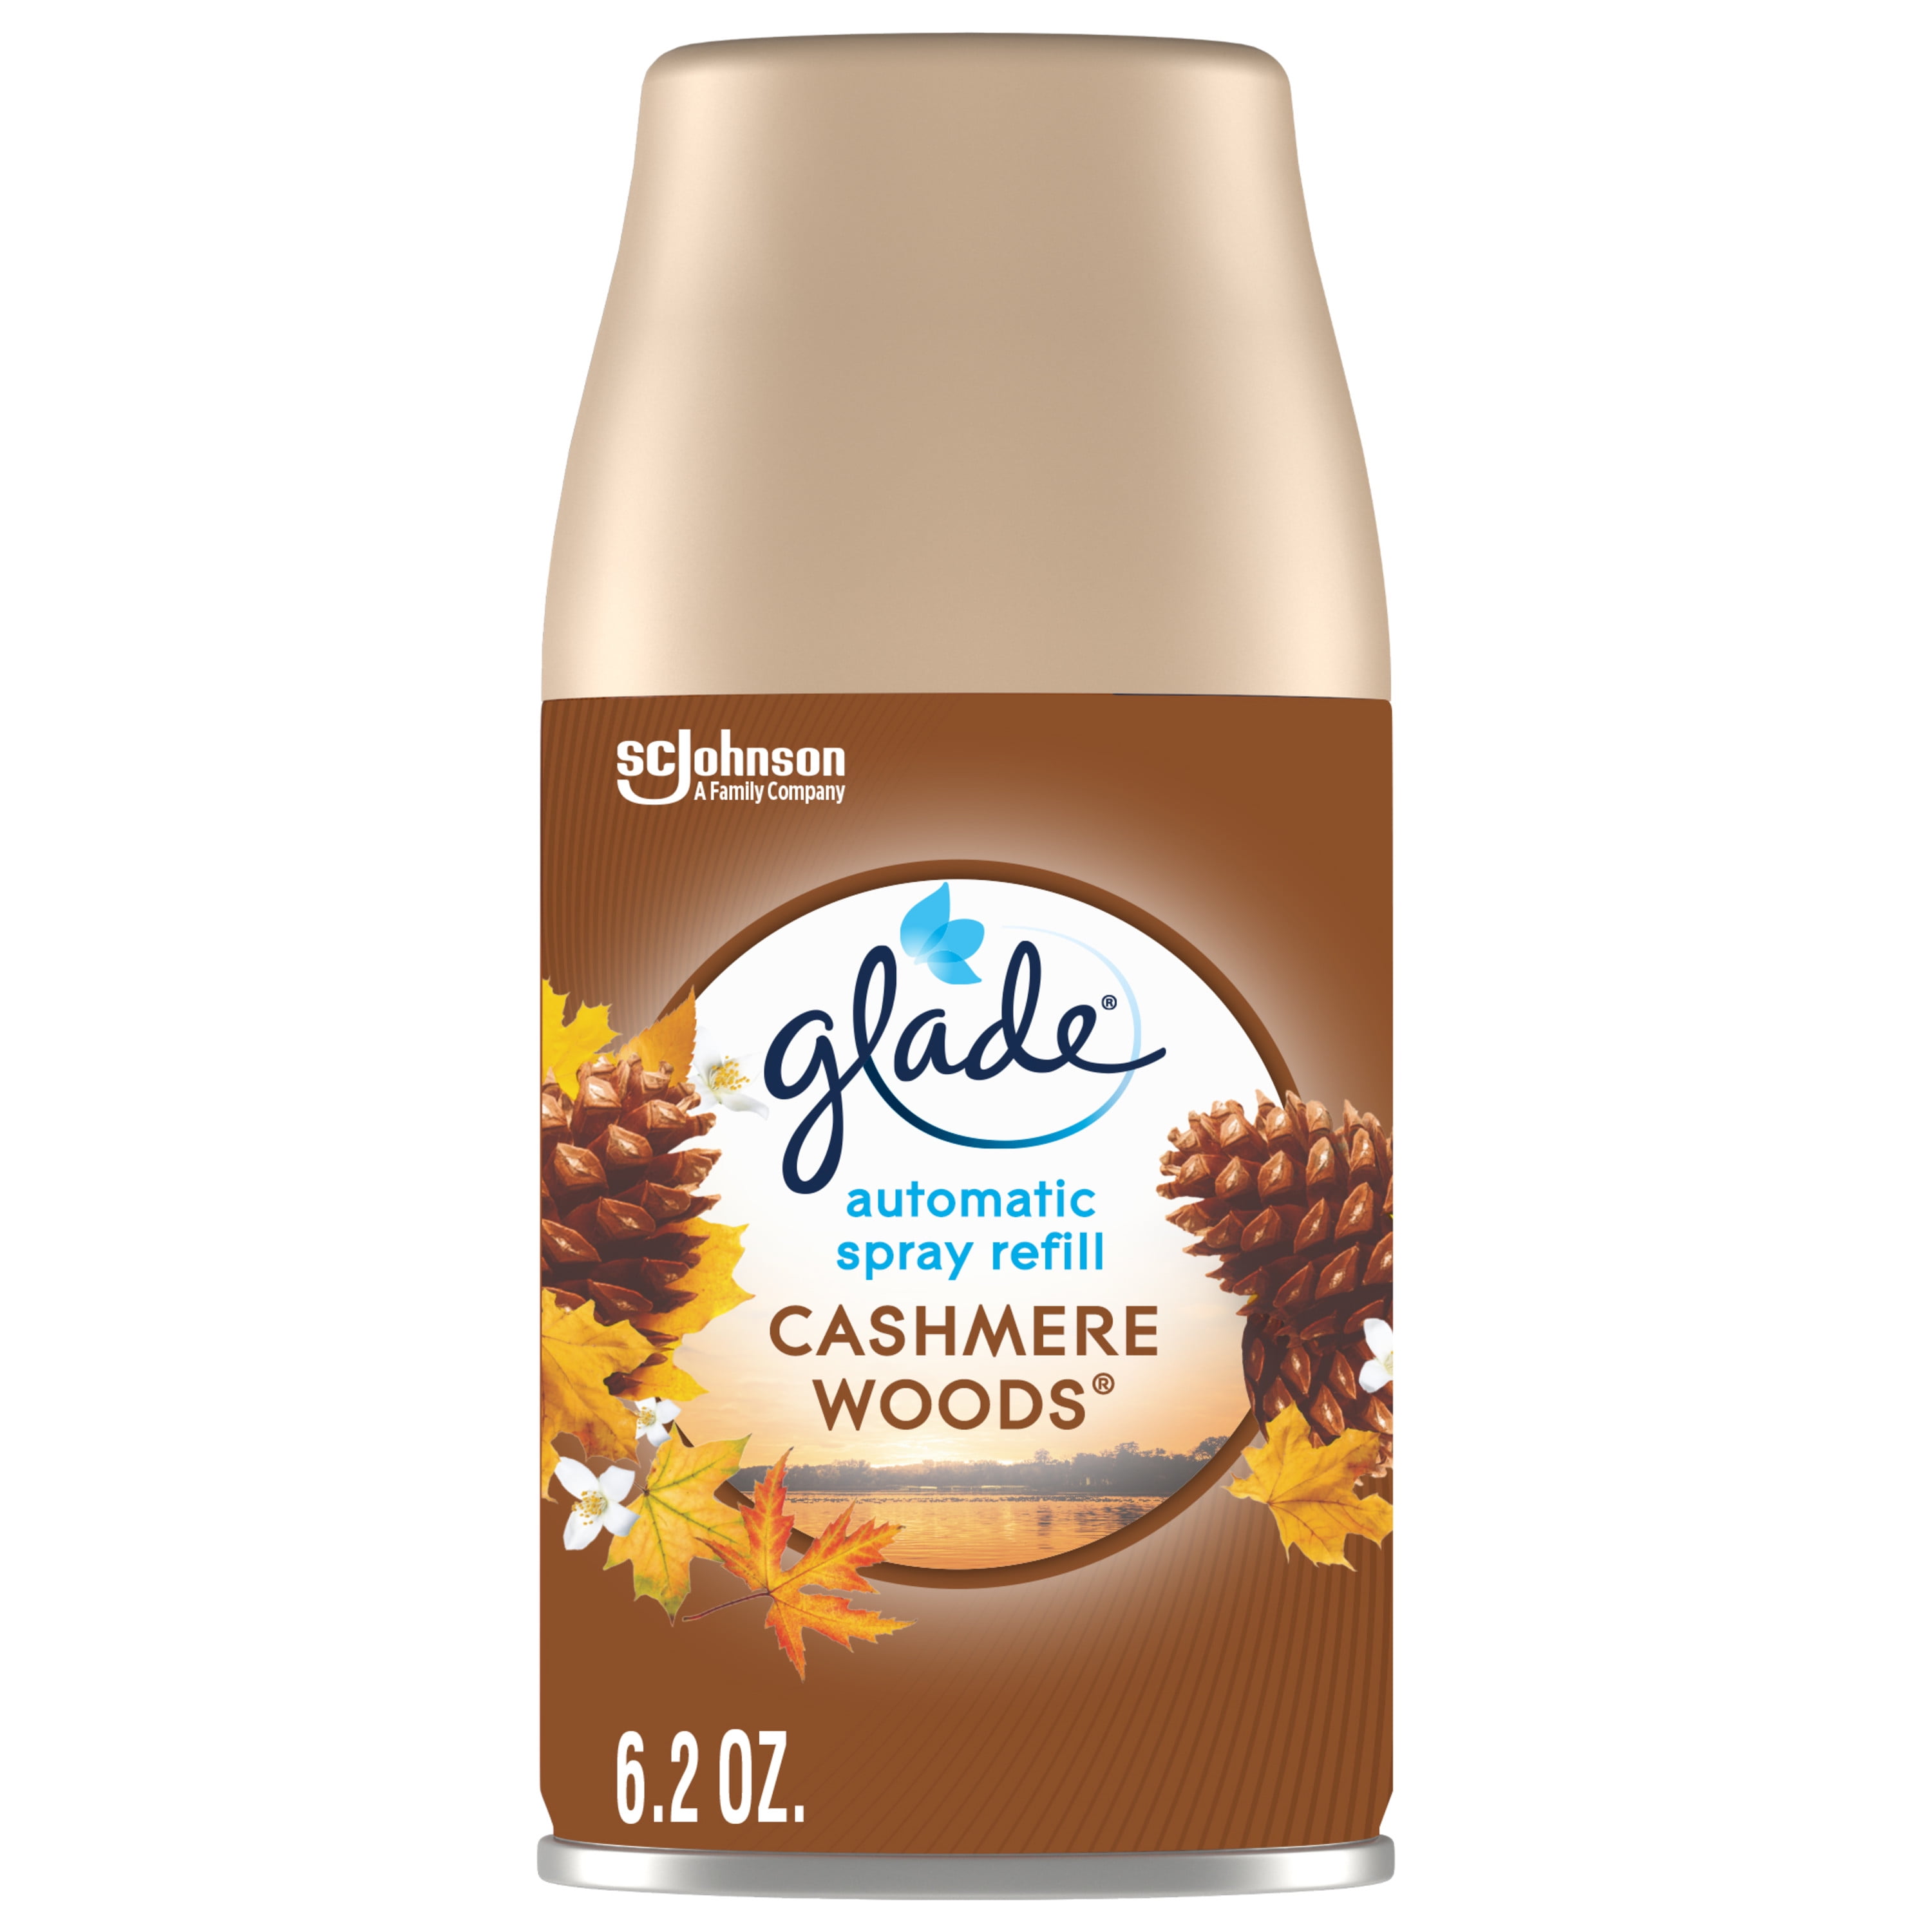 Glade Automatic Spray Refill 1 CT, Cashmere Woods, 6.2 OZ. Total, Air Freshener Infused with Essential Oils